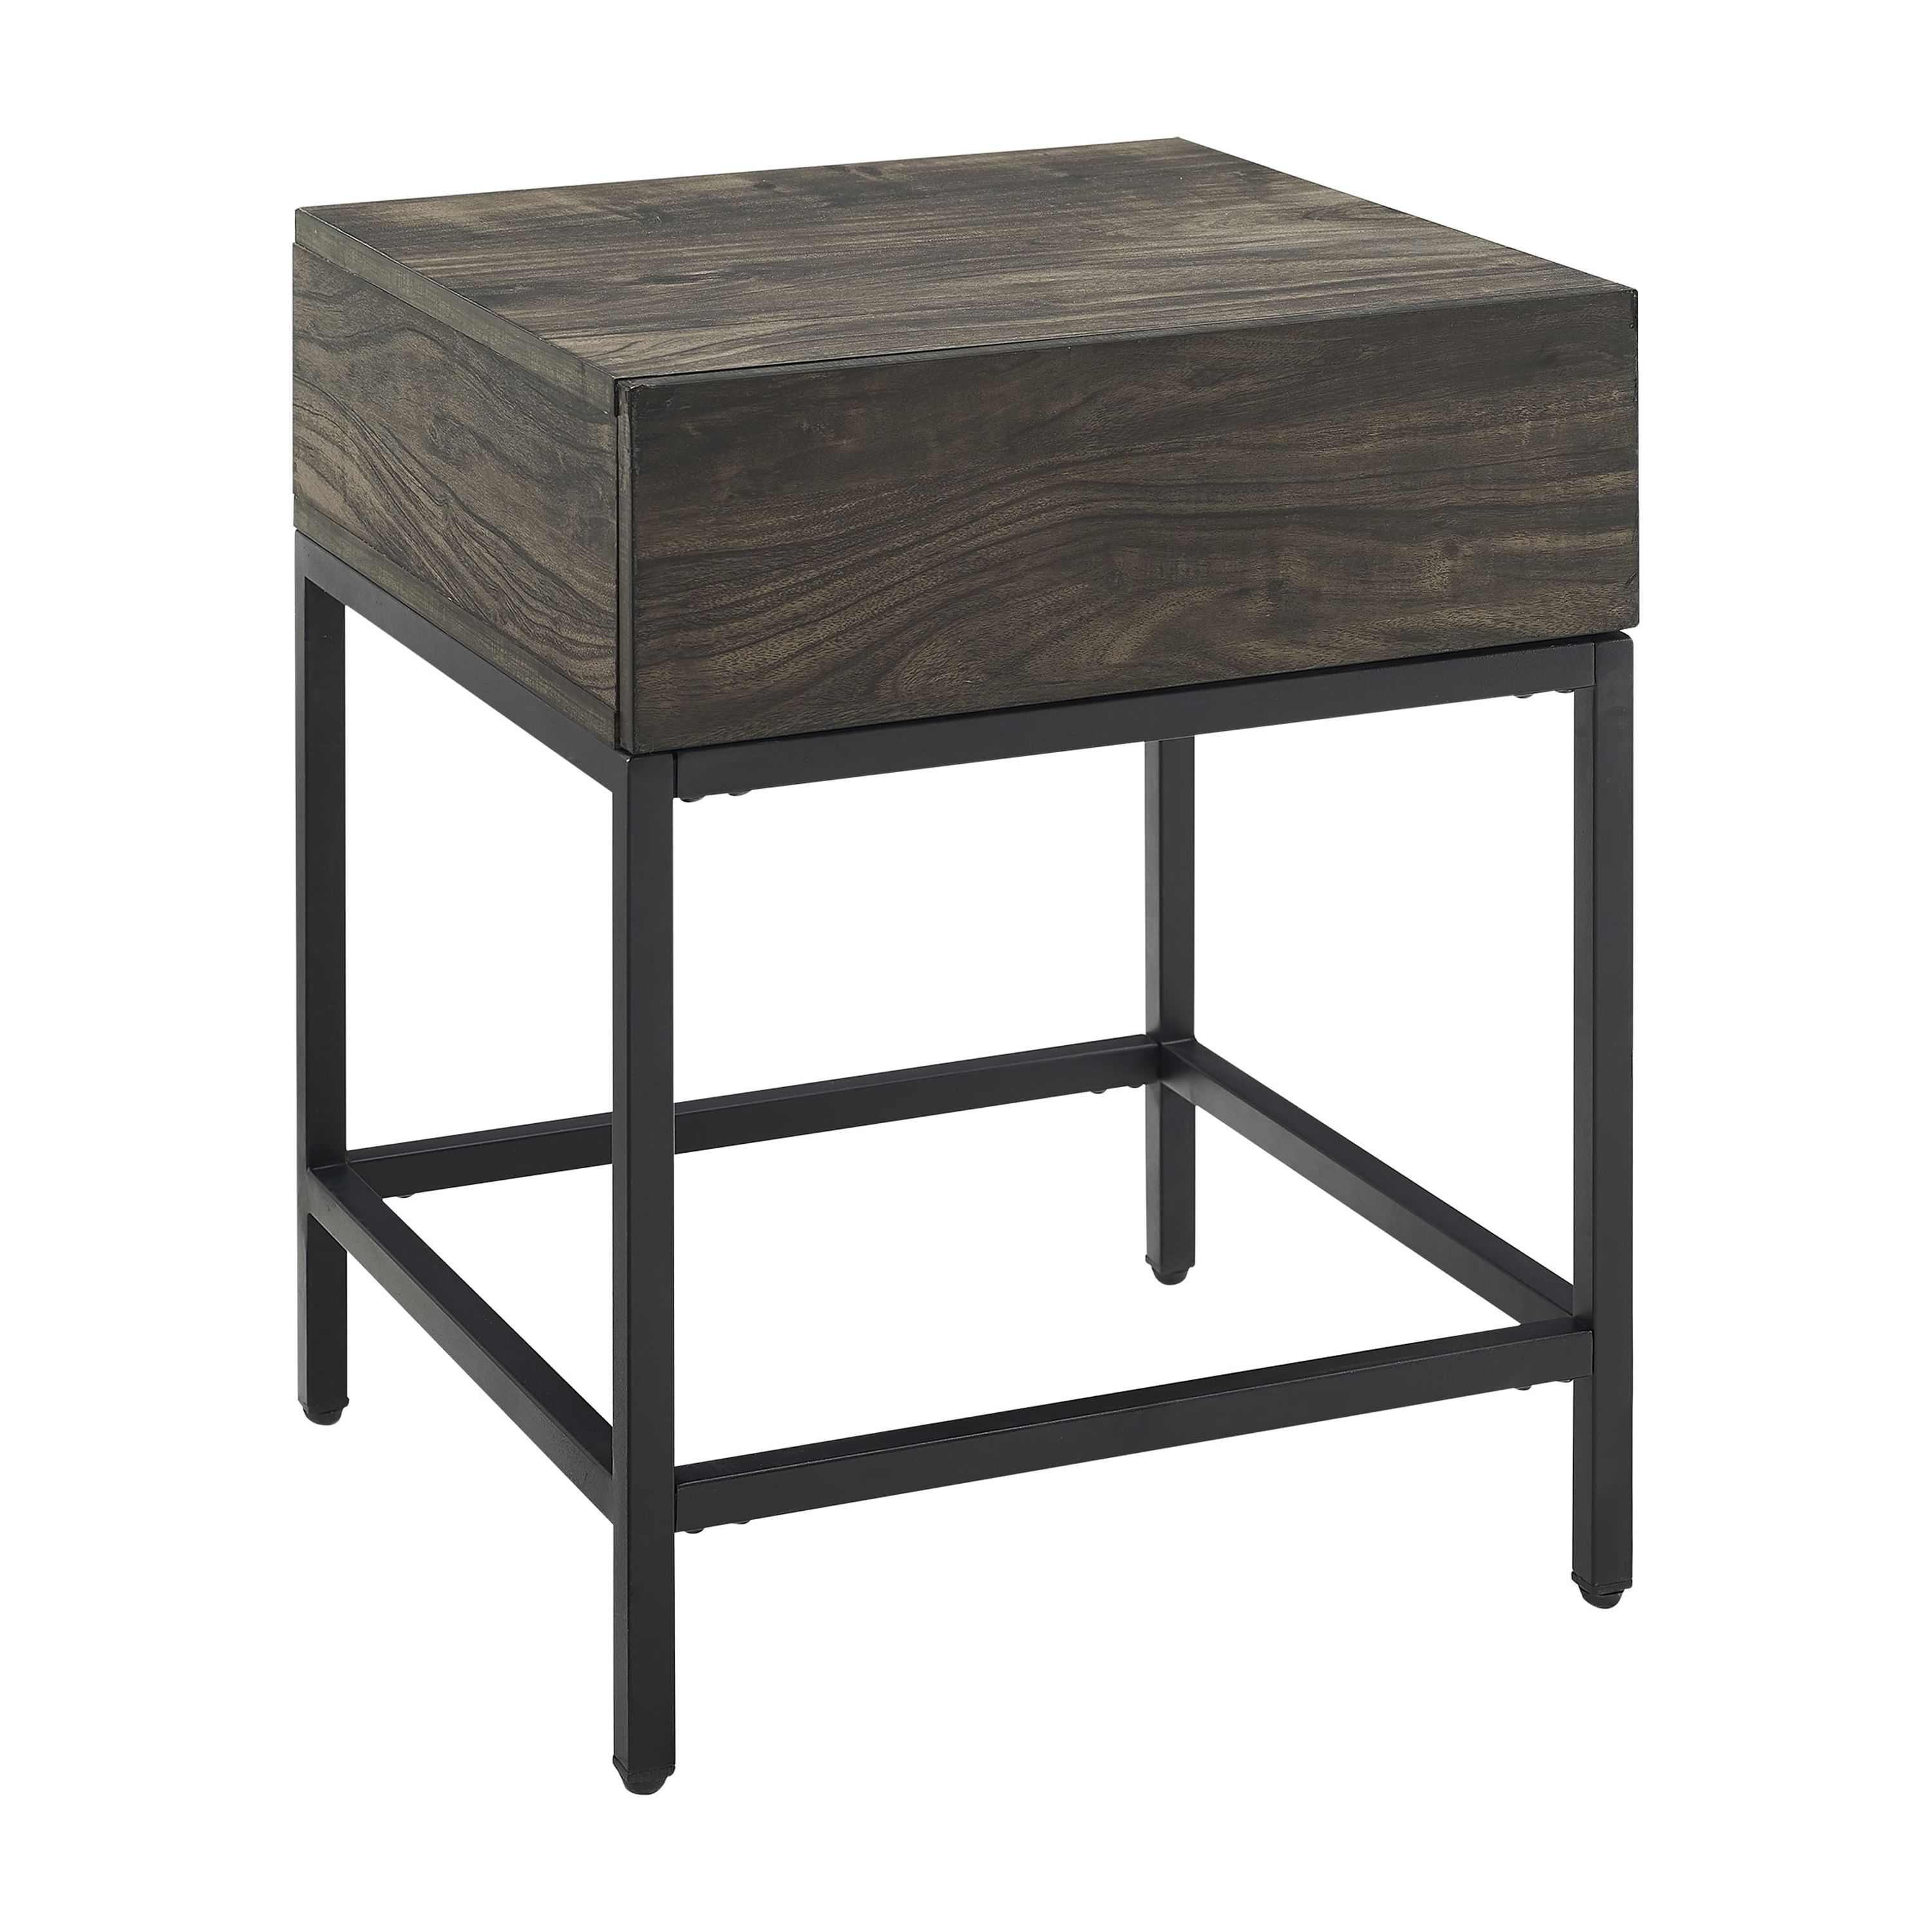 Crosley Jacobsen 1 Drawer End Table in Brown Ash - image 4 of 12